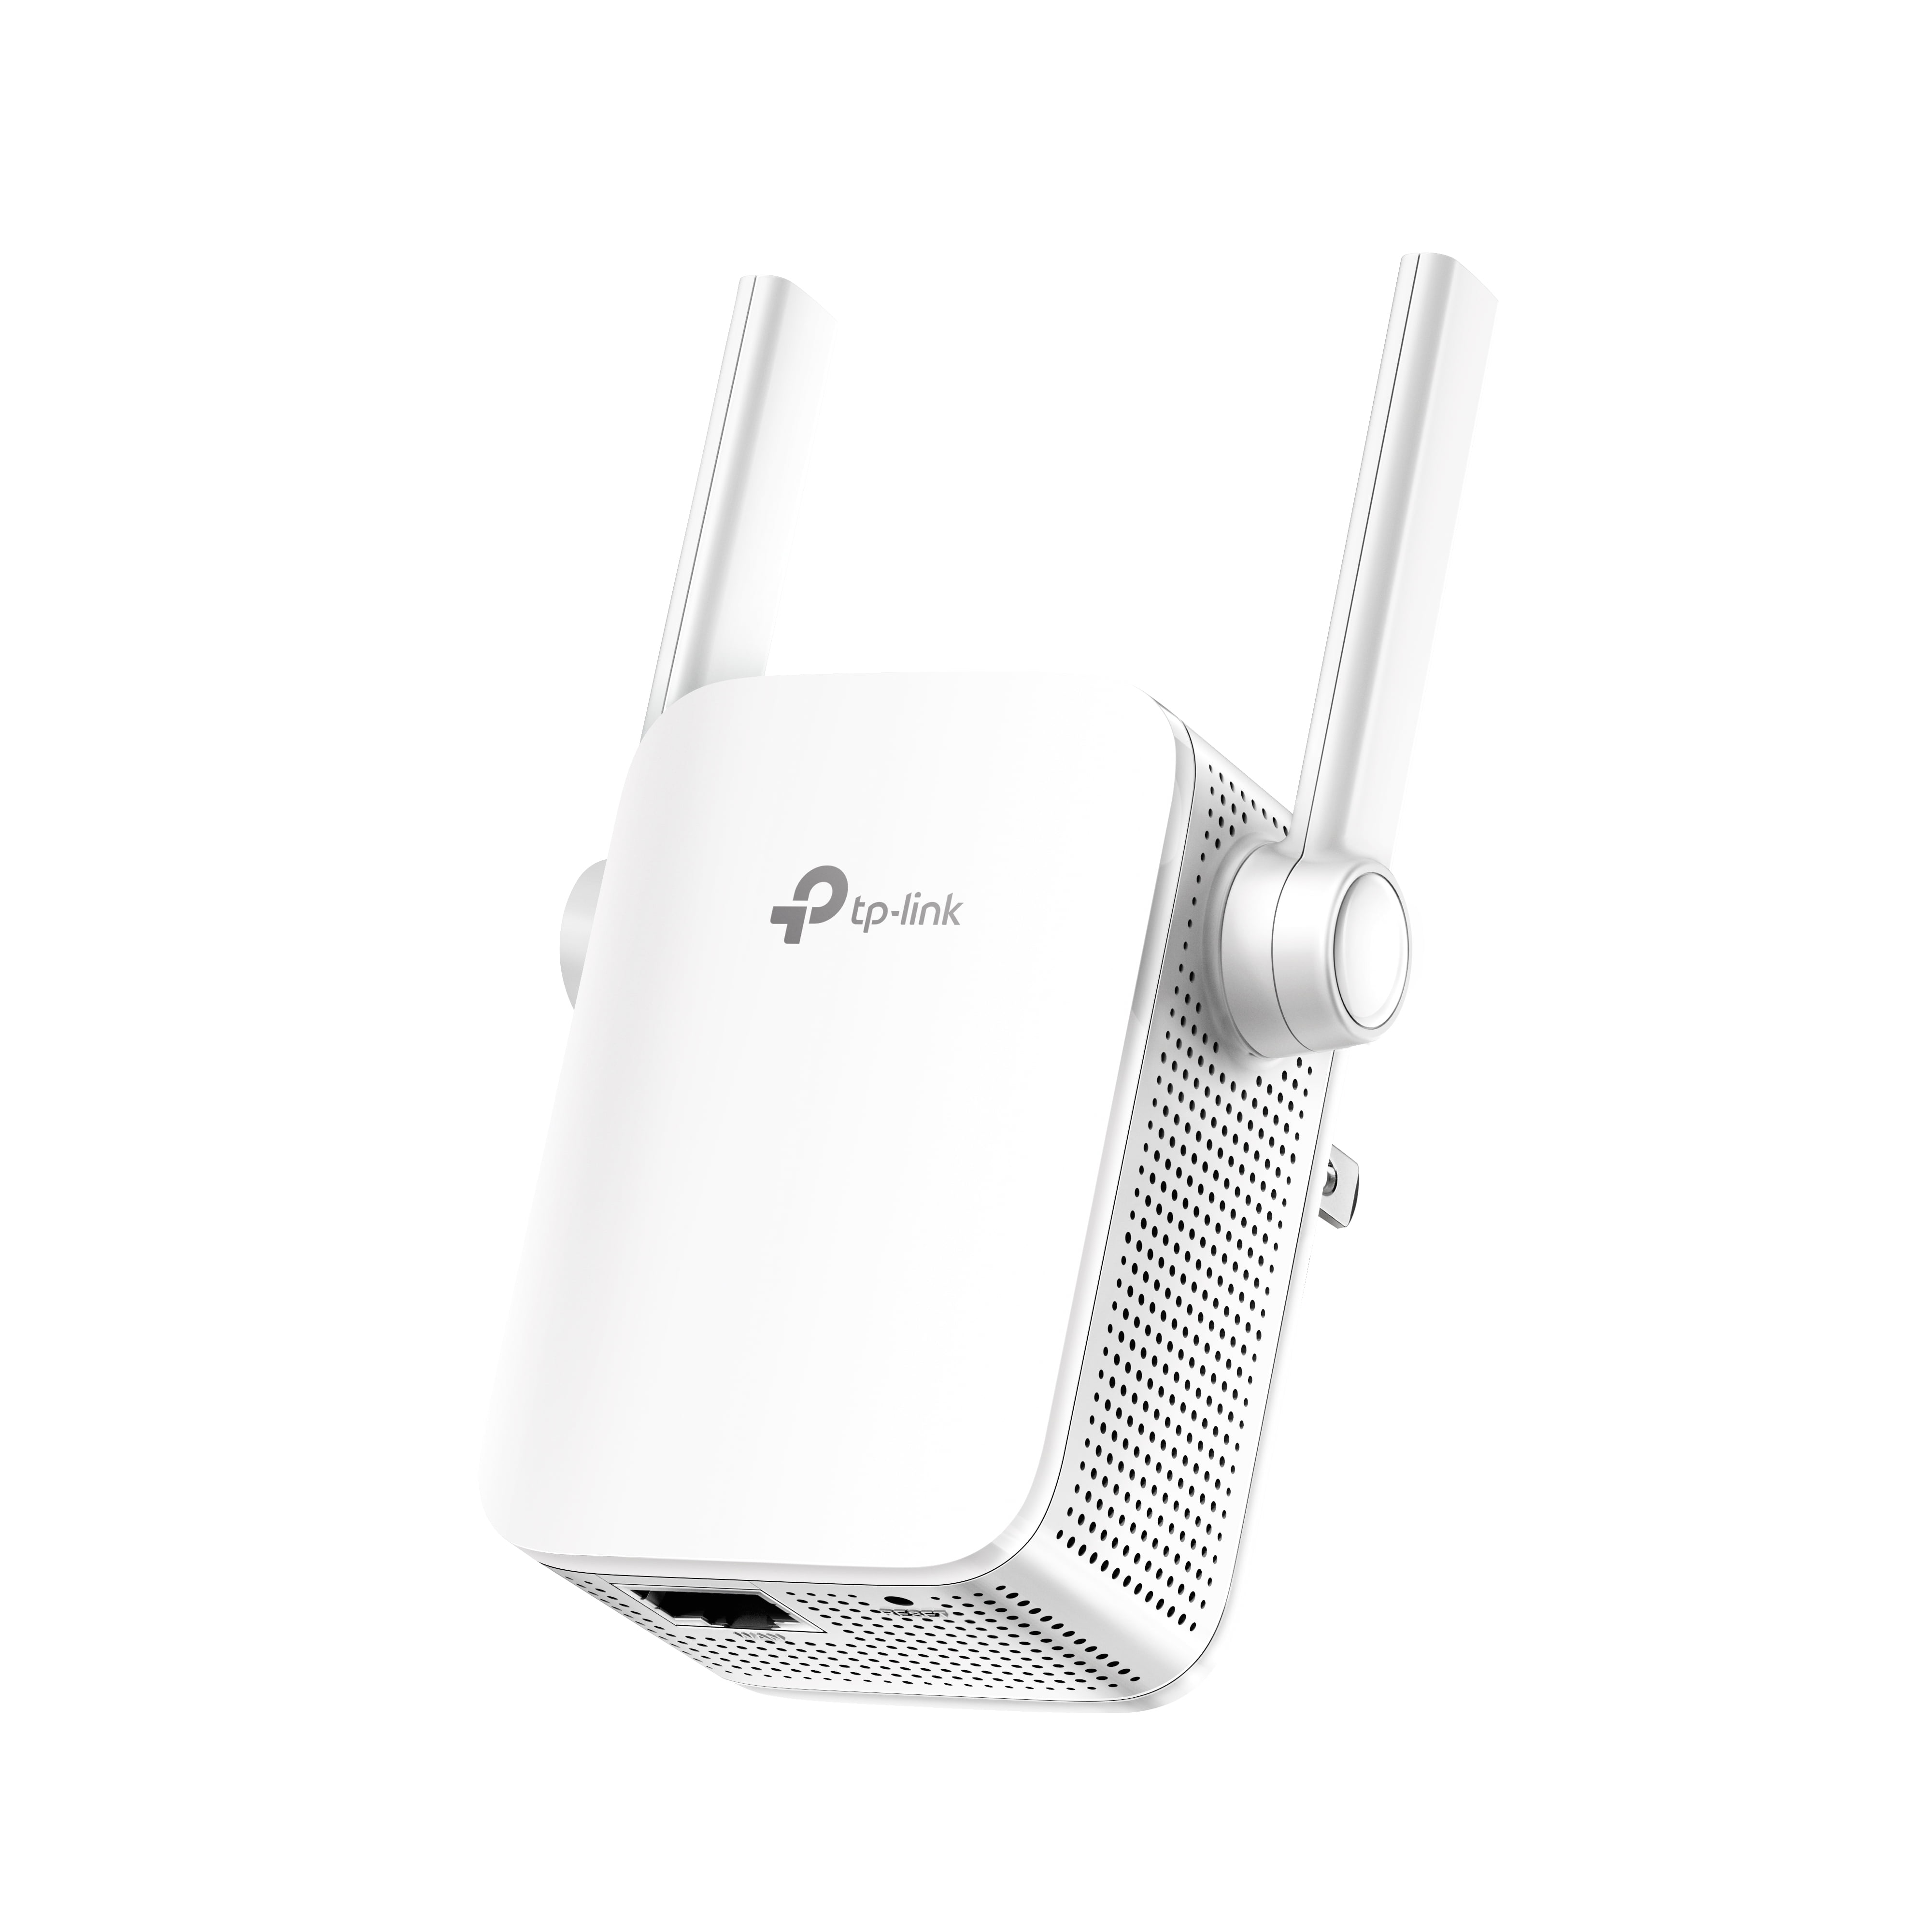 TP-LINK USA CORPORATION TP-Link RE305 Networking AC1200 WiFi Range Extender 100m 802.11ac